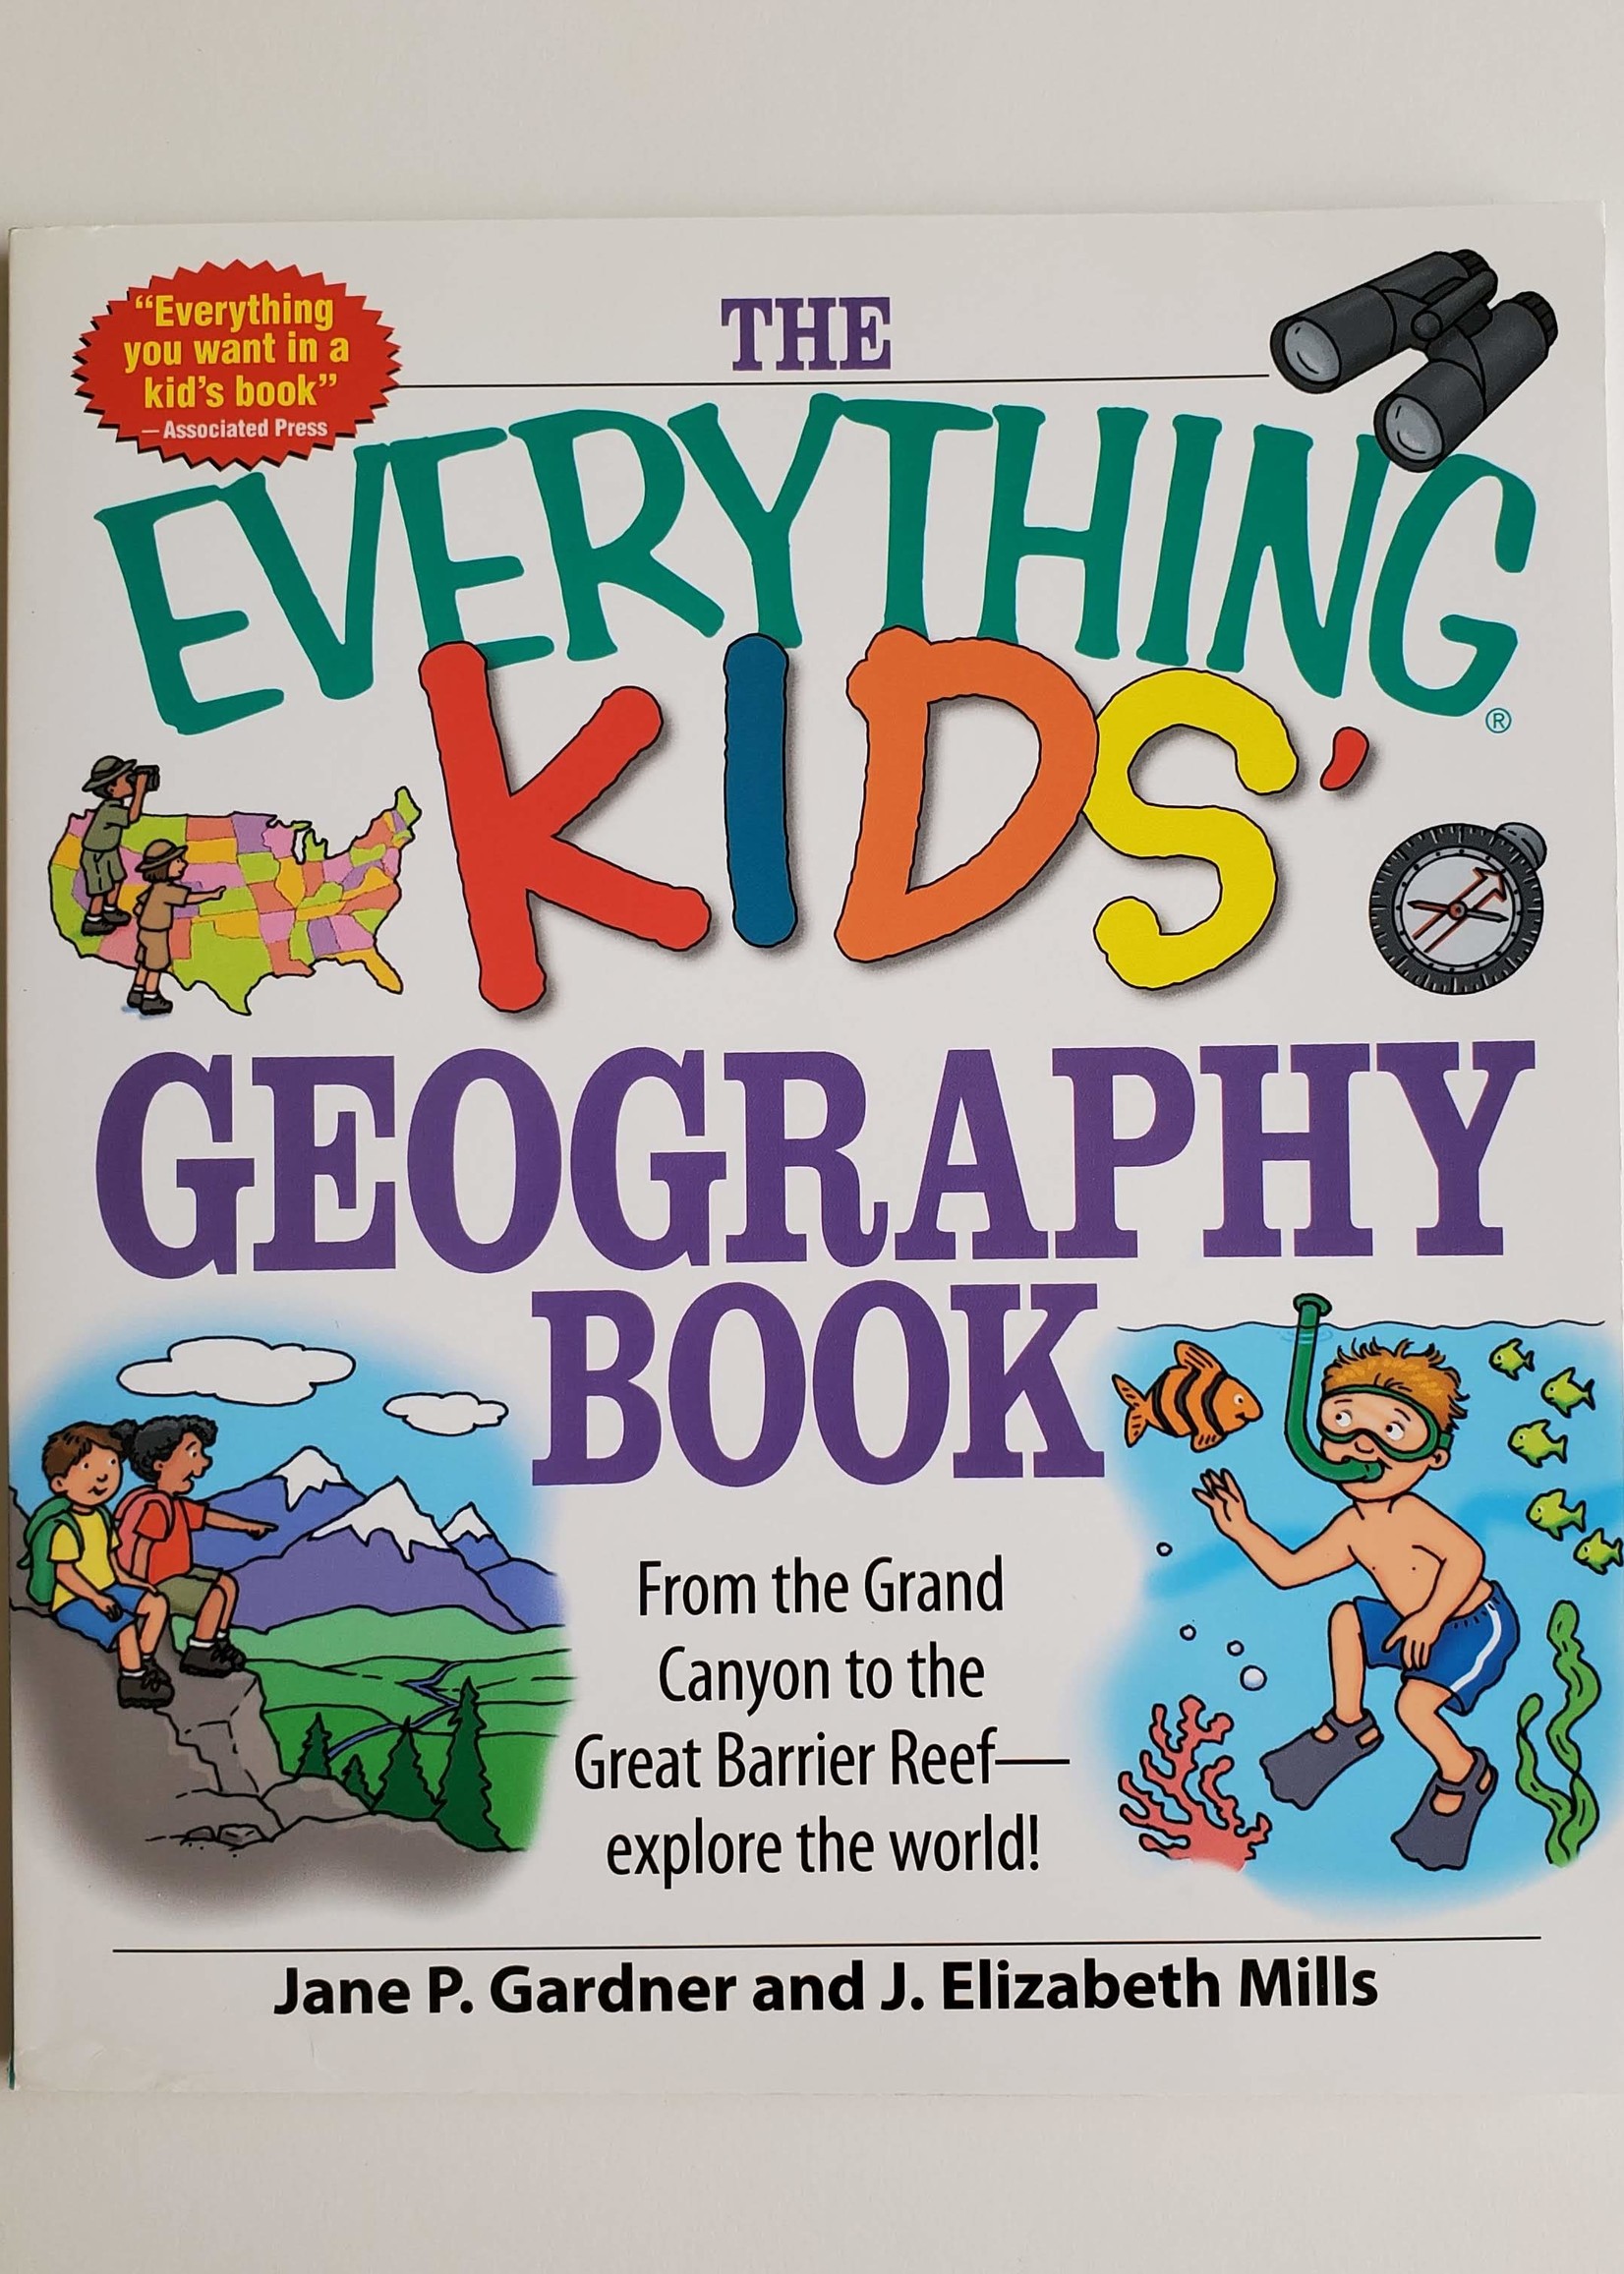 The Everything Kids' Geography Book